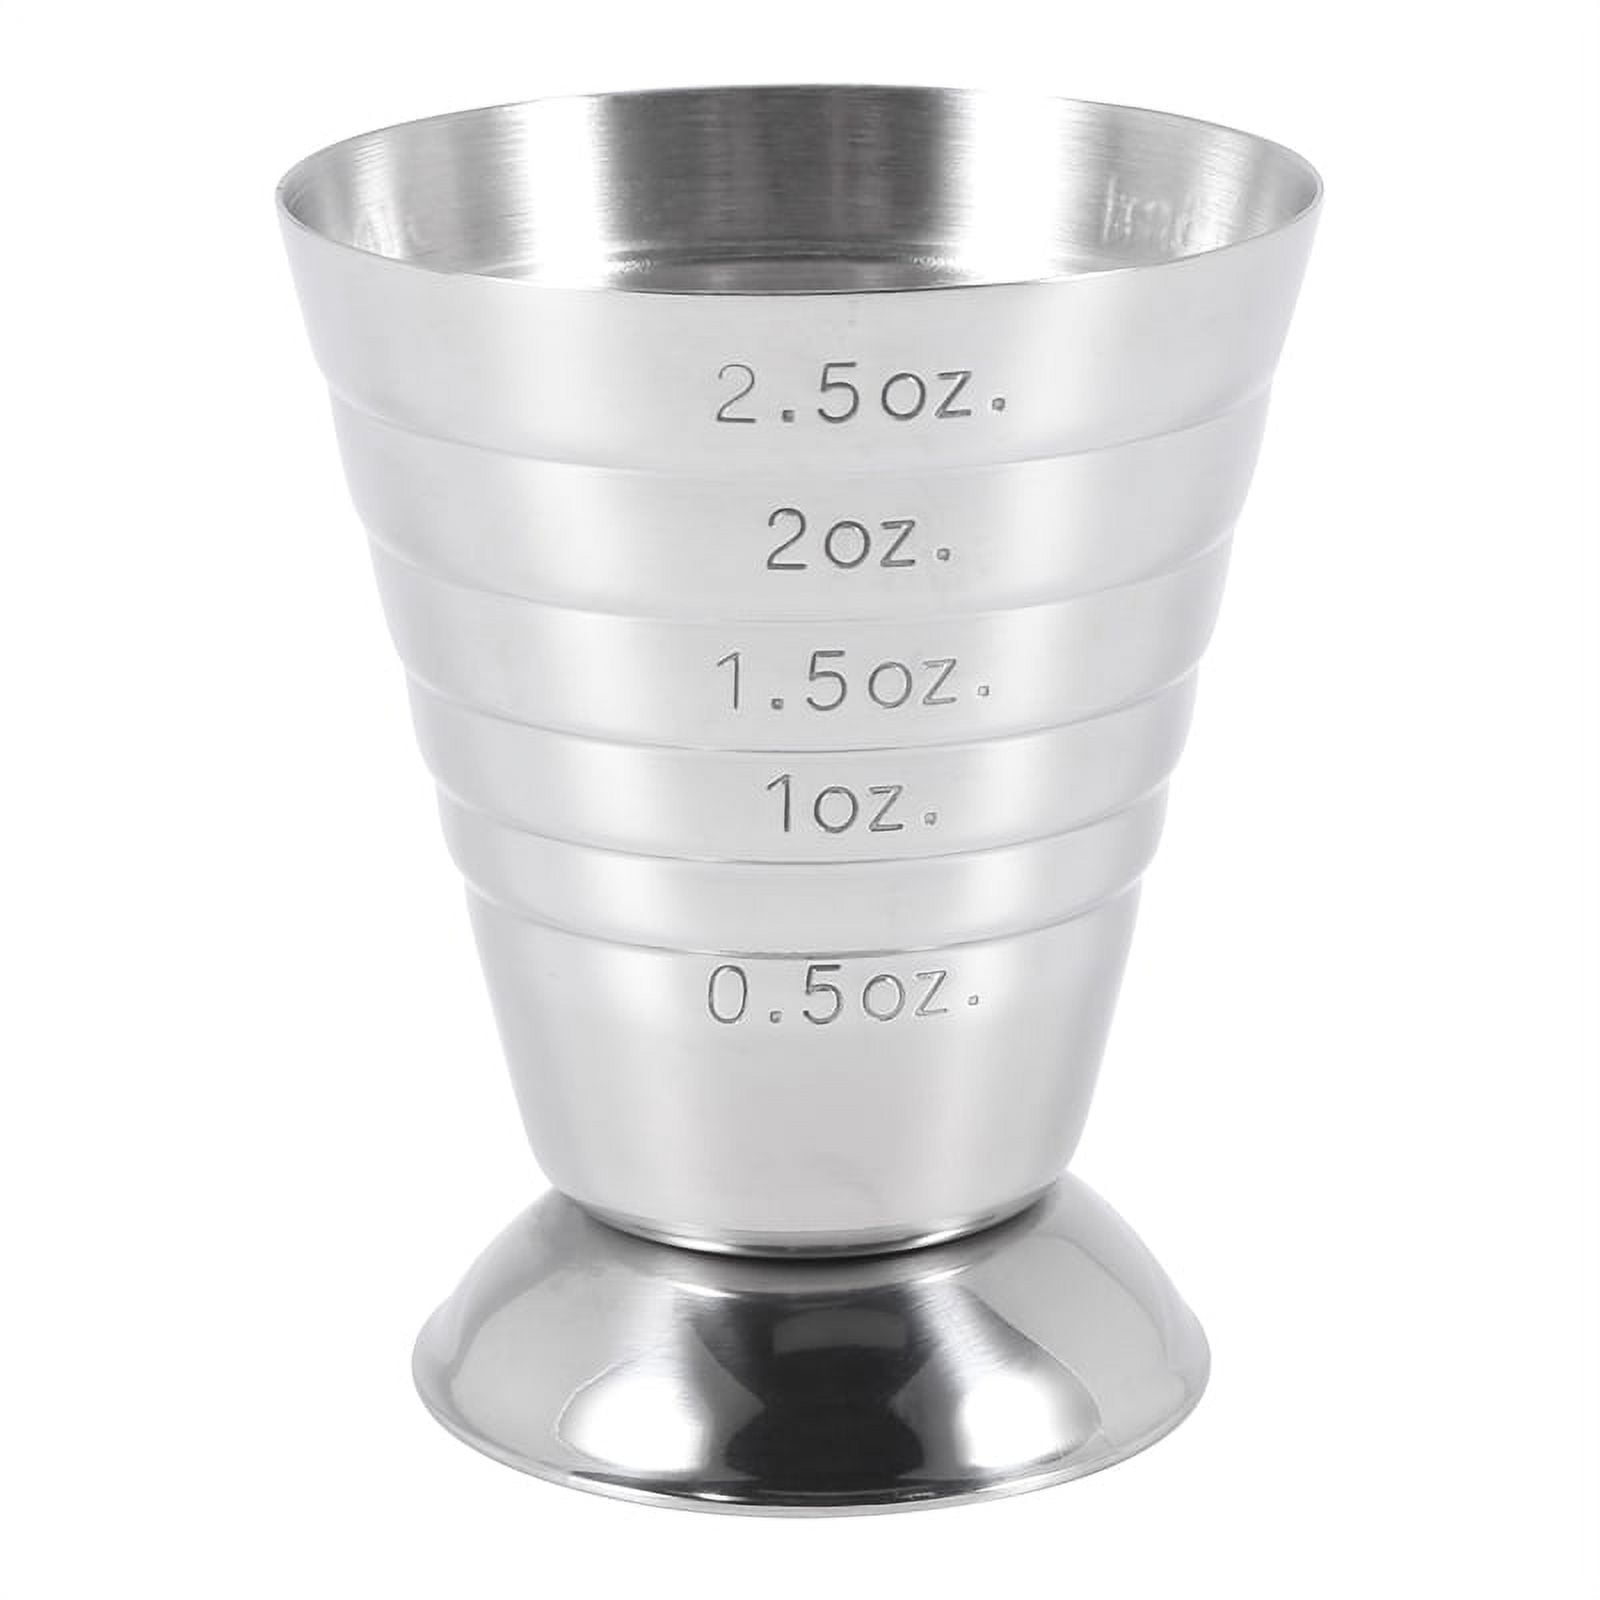 Cyrank 2pcs Measuring Cup, Stainless Steel Cocktail Jigger 2.5 oz, 5 Tbsp7, 5 ml Mini Alcohol Measuring Tools Metal Shot Jigger with Scale for Bar